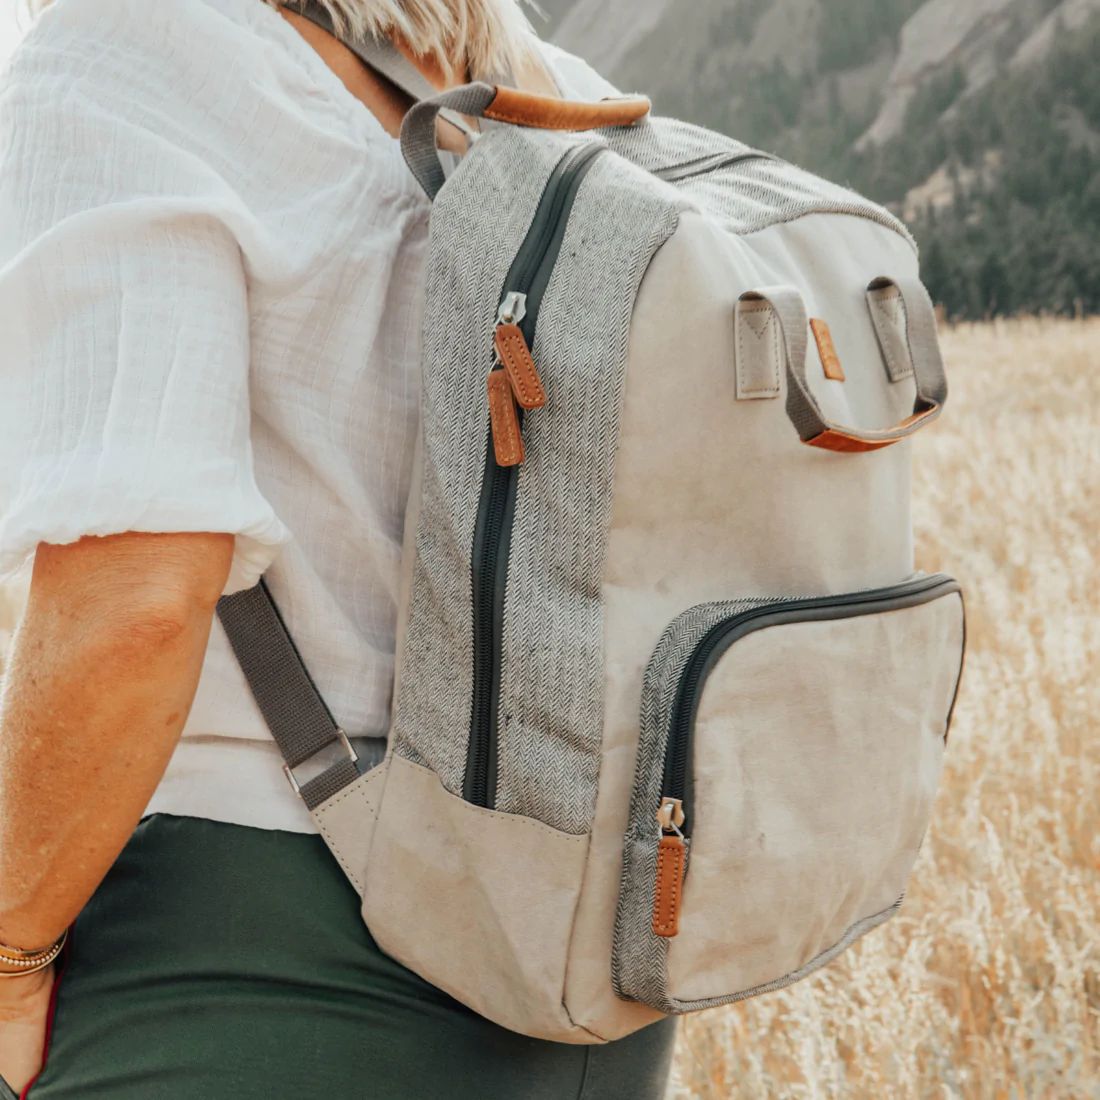 Out Of The Woods Backpack Sac à Dos από πλενόμενο χαρτί